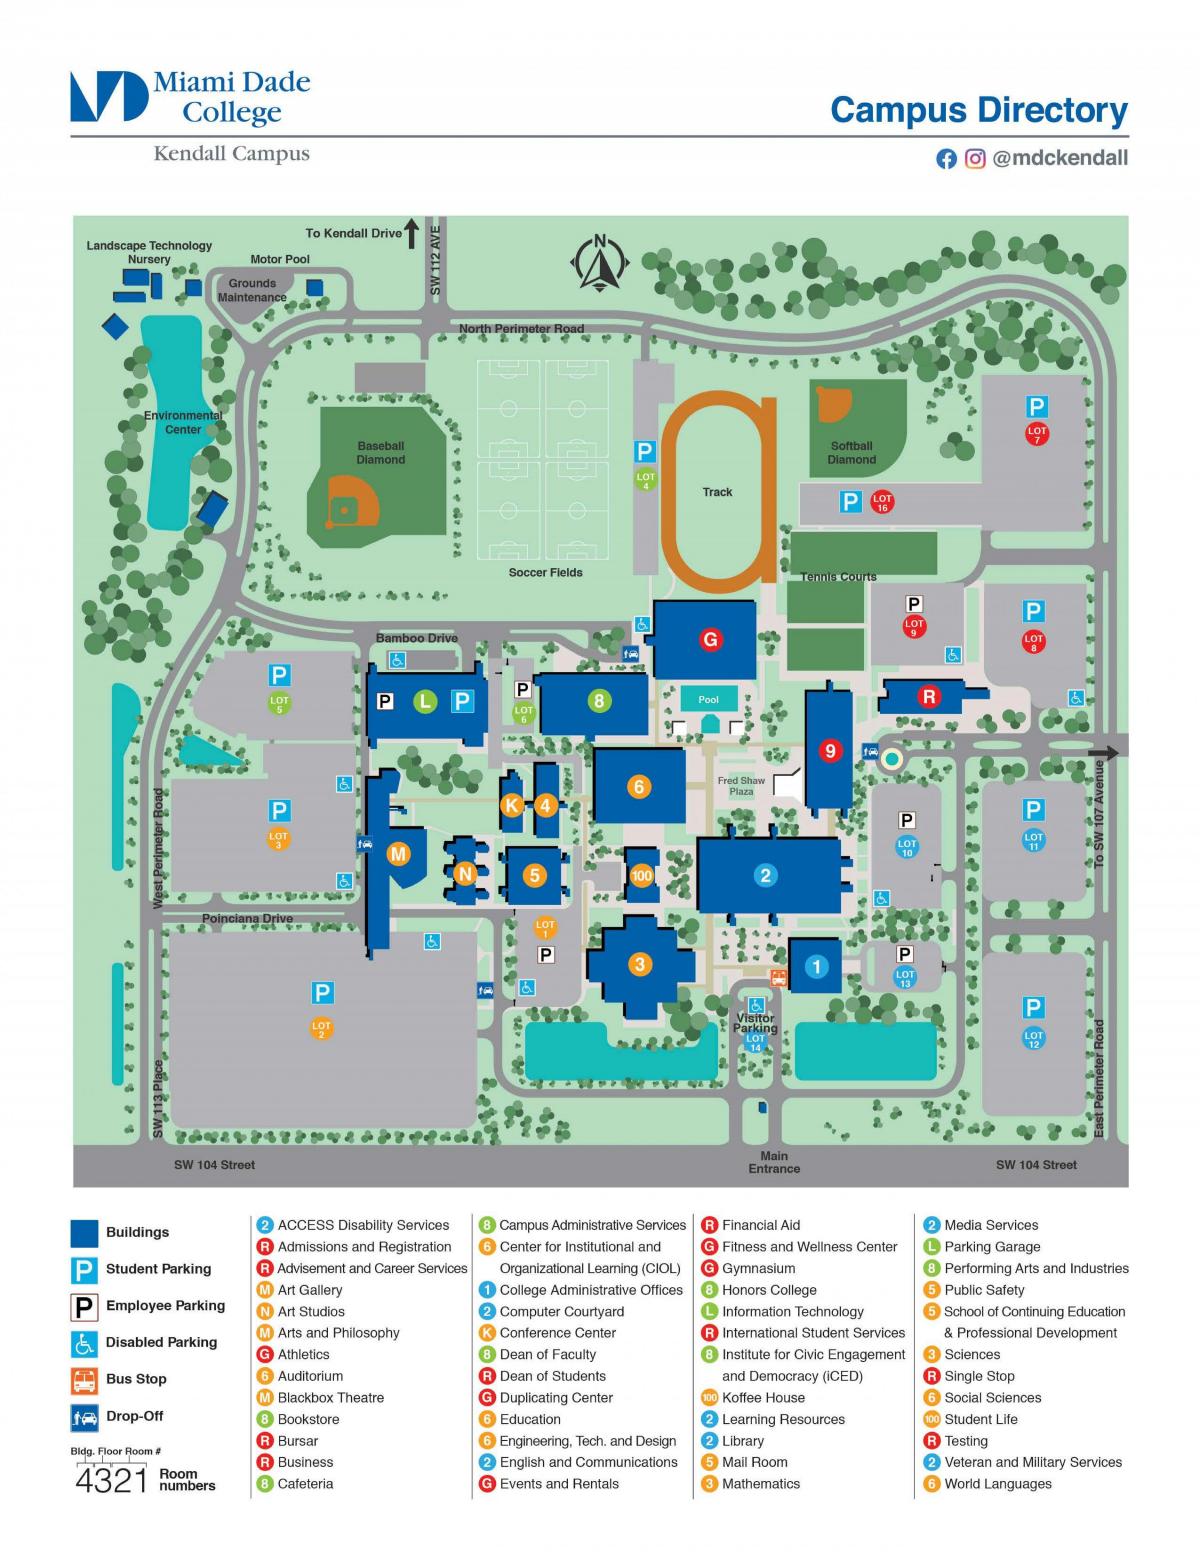 Miami Dade college Kendall campus map